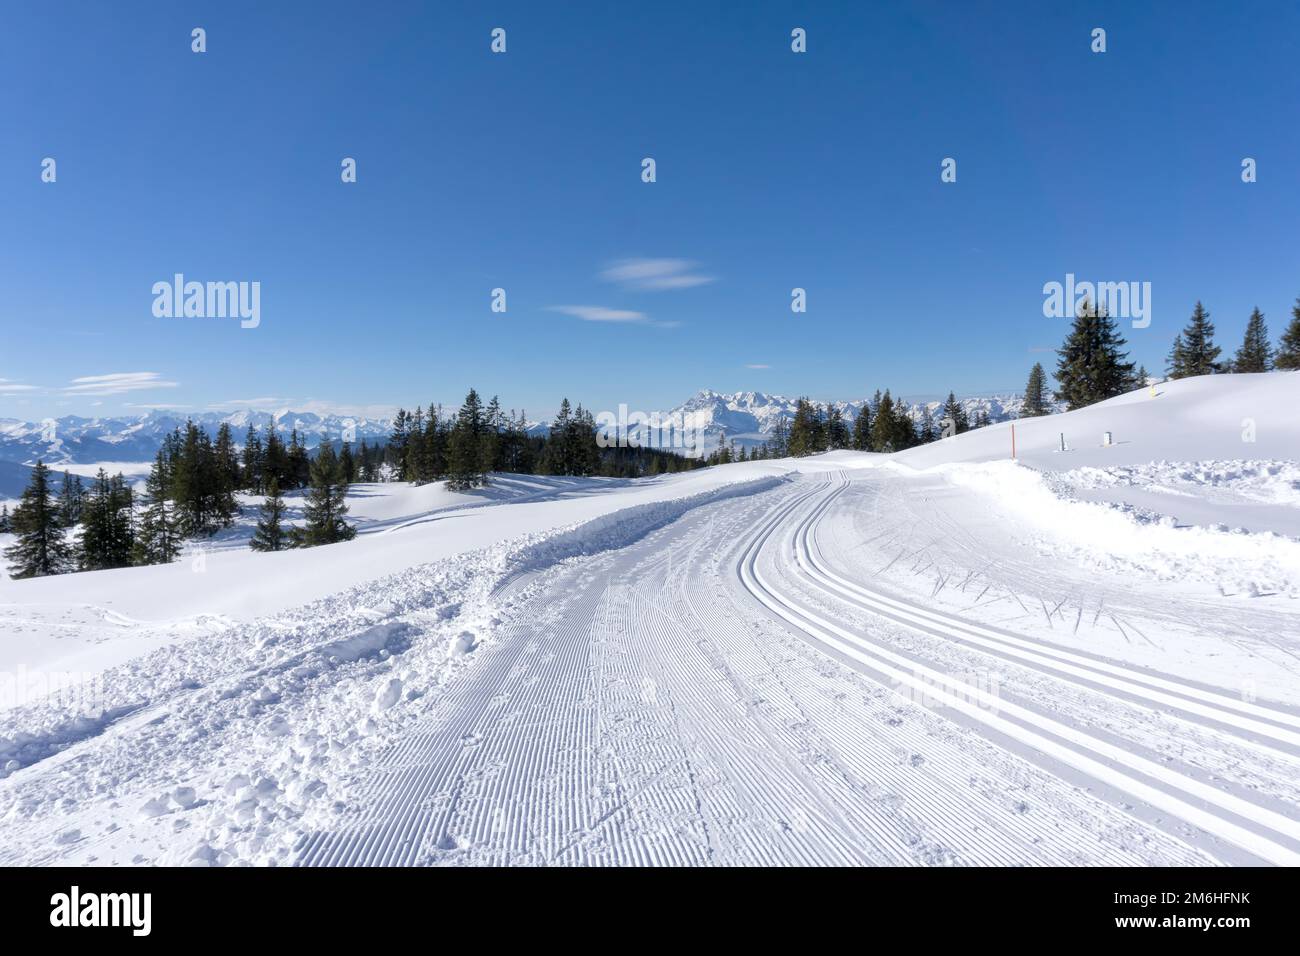 Winter mountain landscape, sunny day  in Salzburg Alps. Winter road with groomed ski trails. Stock Photo